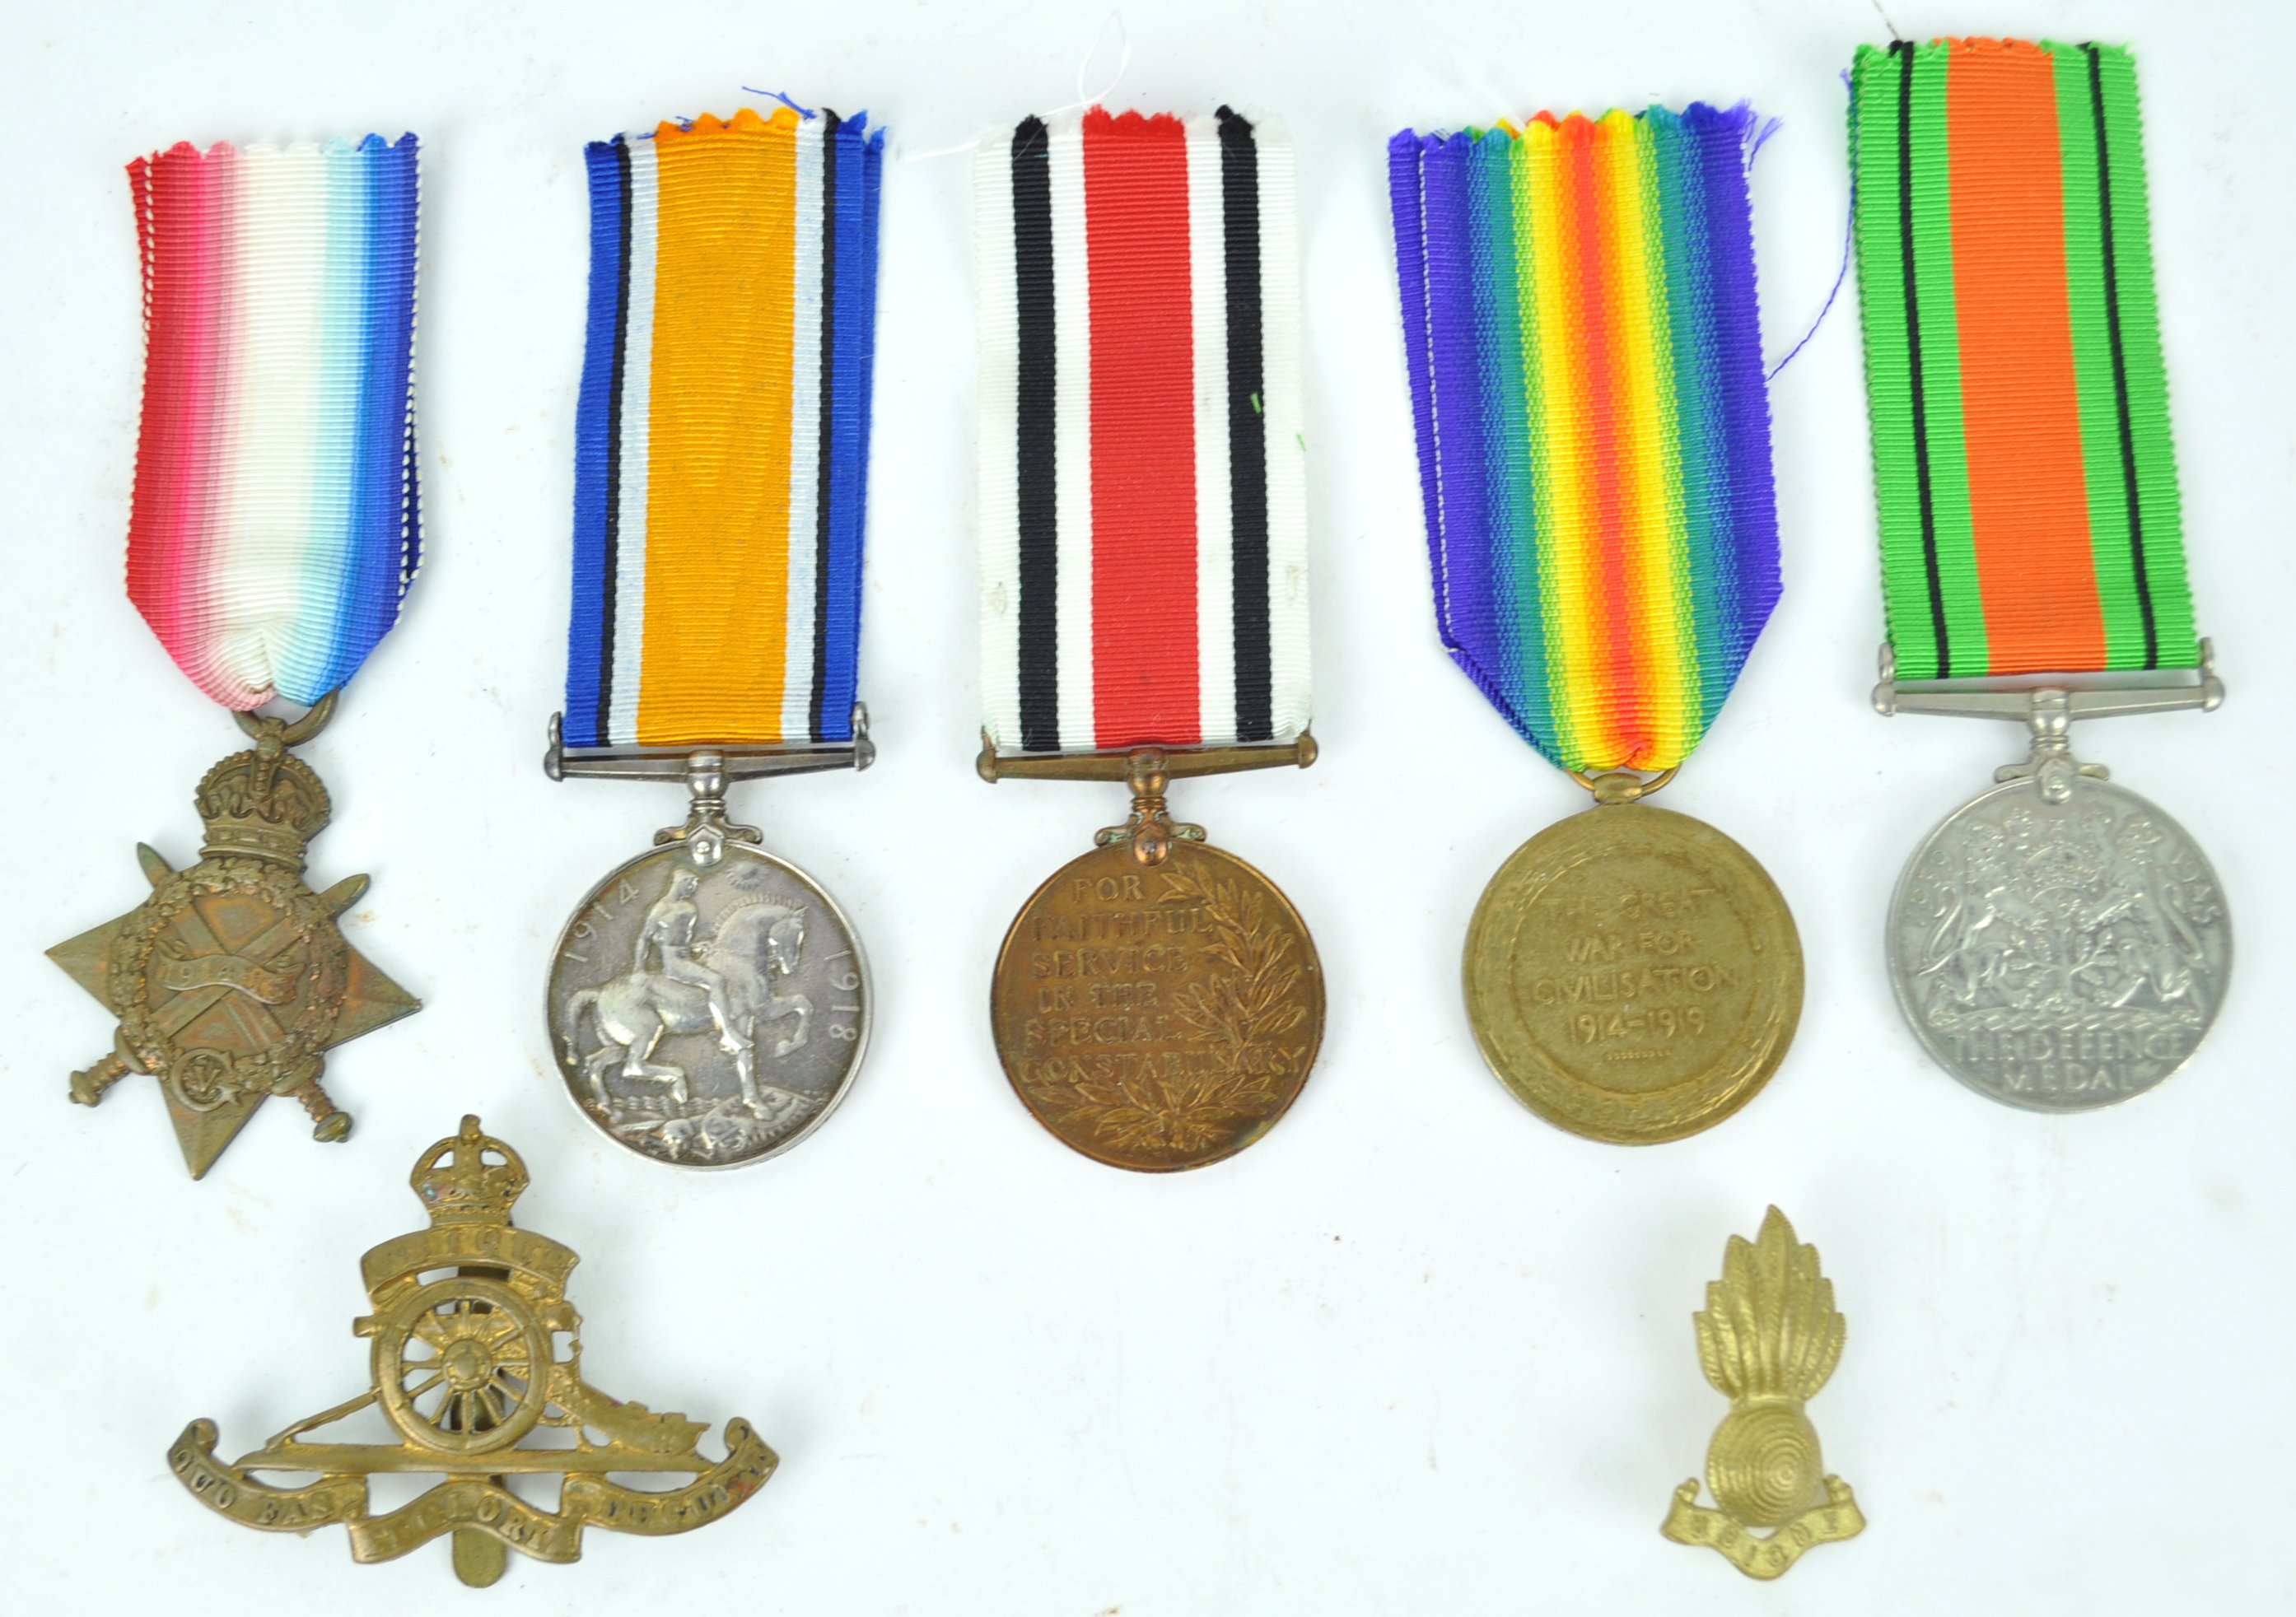 A WWI and WWII Medal group to 827 Dvr G Mann, RFA/974 Dvr G Mann RA, comprising the 1914-15 Star,